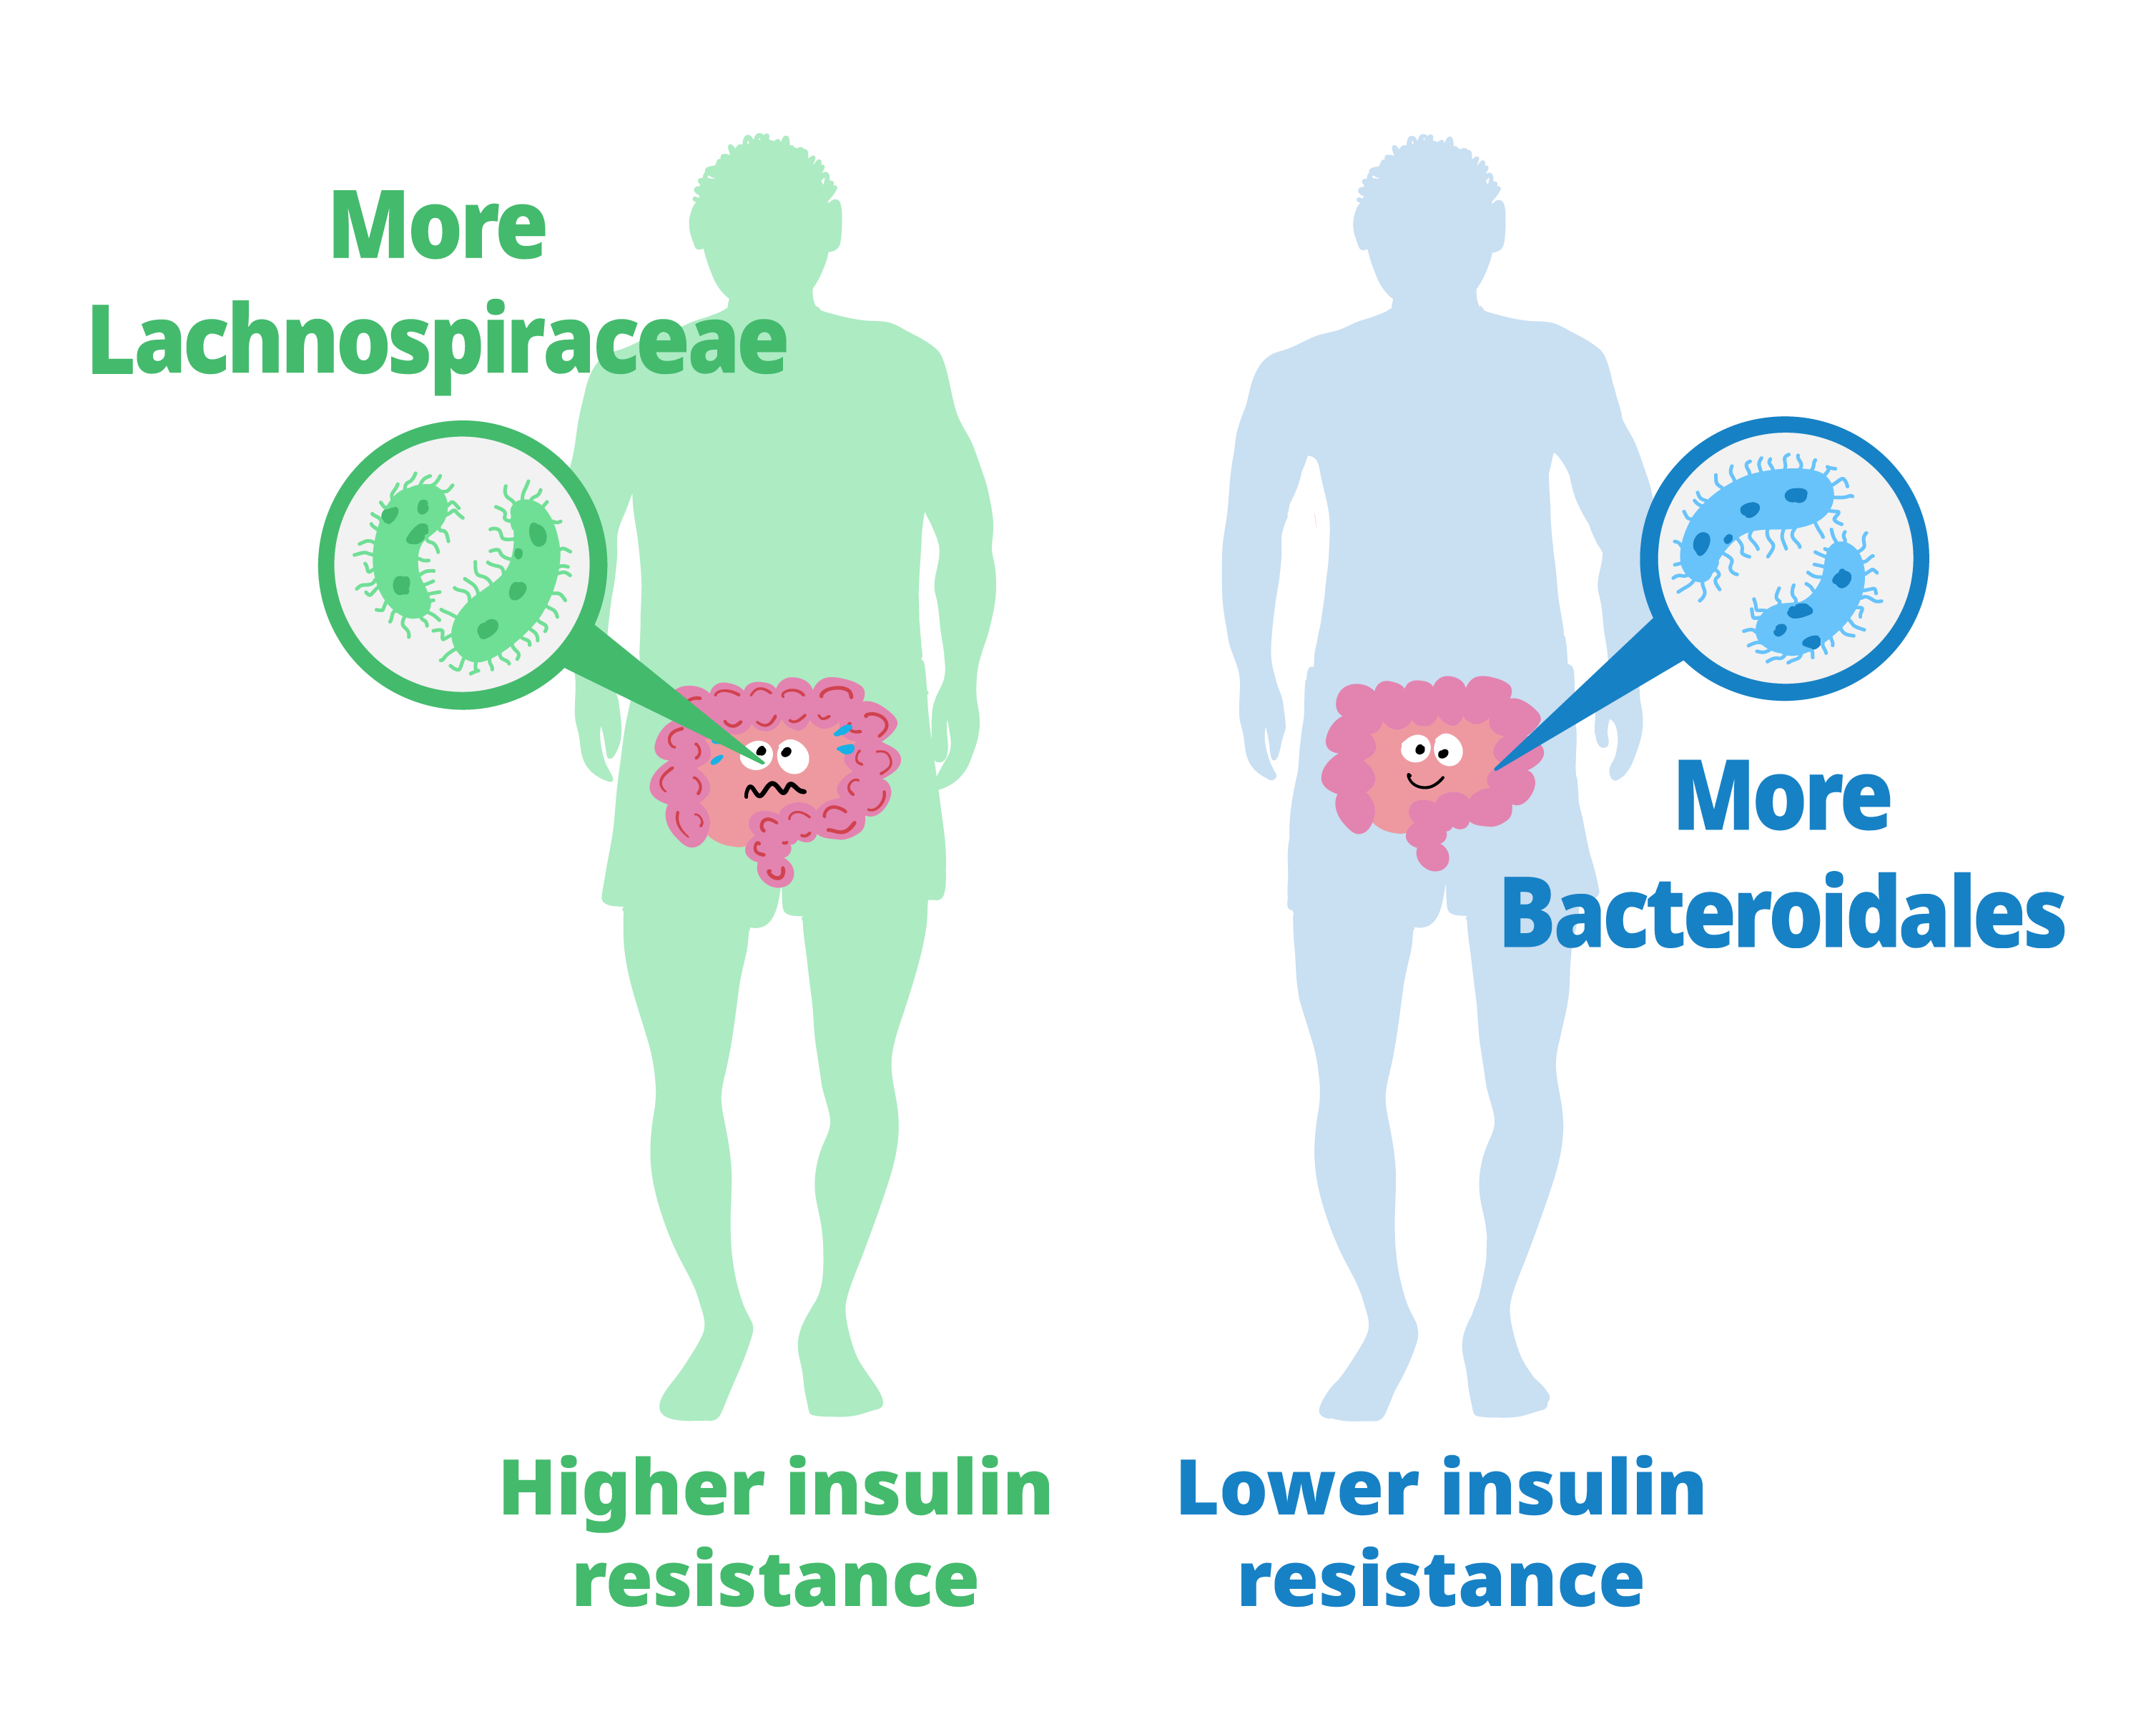 Bacteroidales bacteria reduce insulin resistance